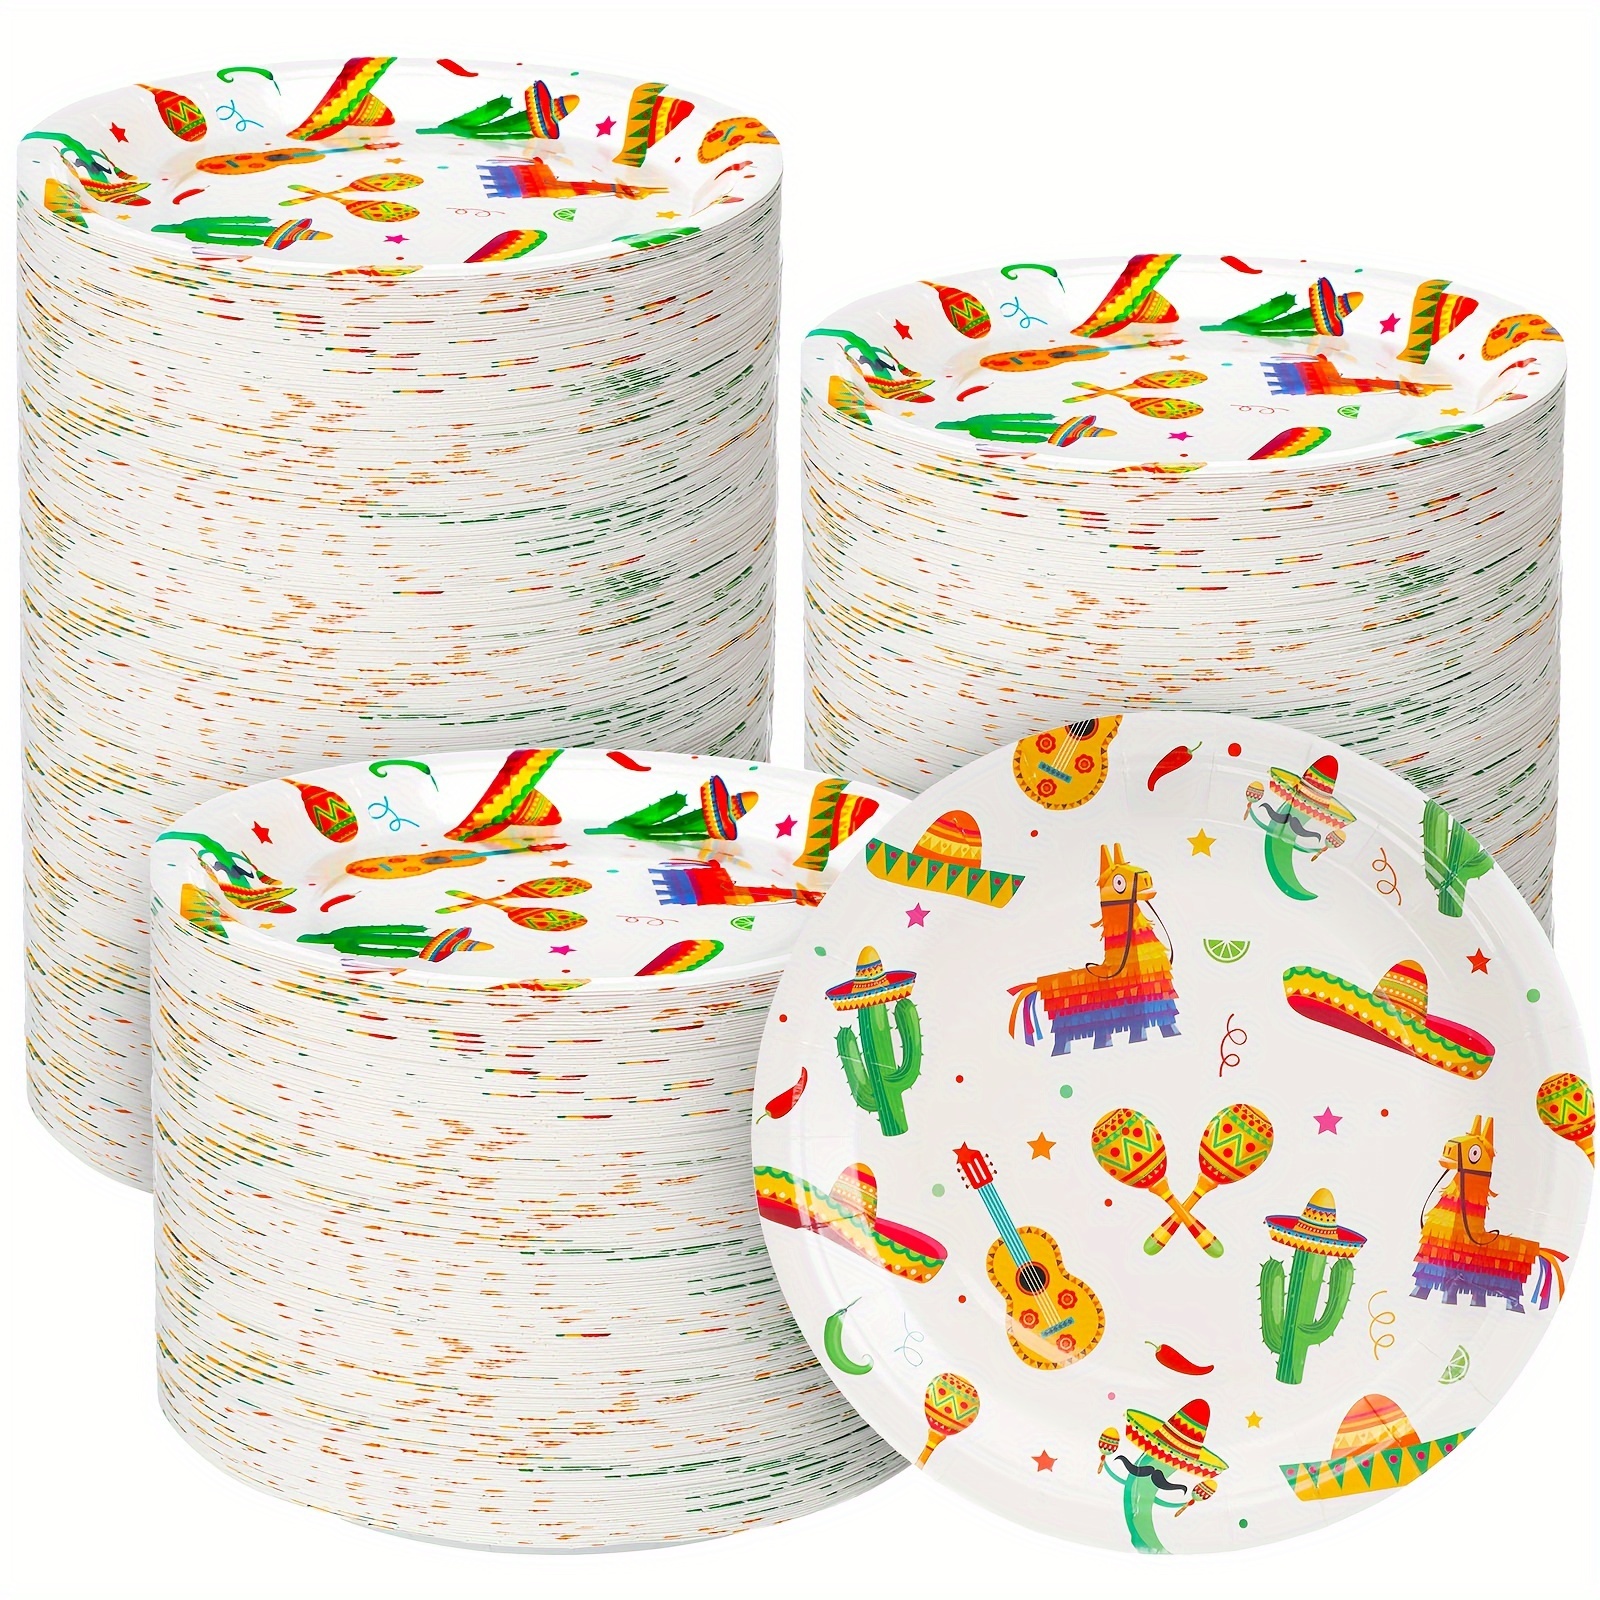 

200 Pieces Fiesta Paper Plates For Cinco De Mayo Party 9 Inch, Mexican Party Dessert Plates Taco Dinner Plates Party Supplies For Fiesta Tuesday Birthday Party Decorations (guitar)